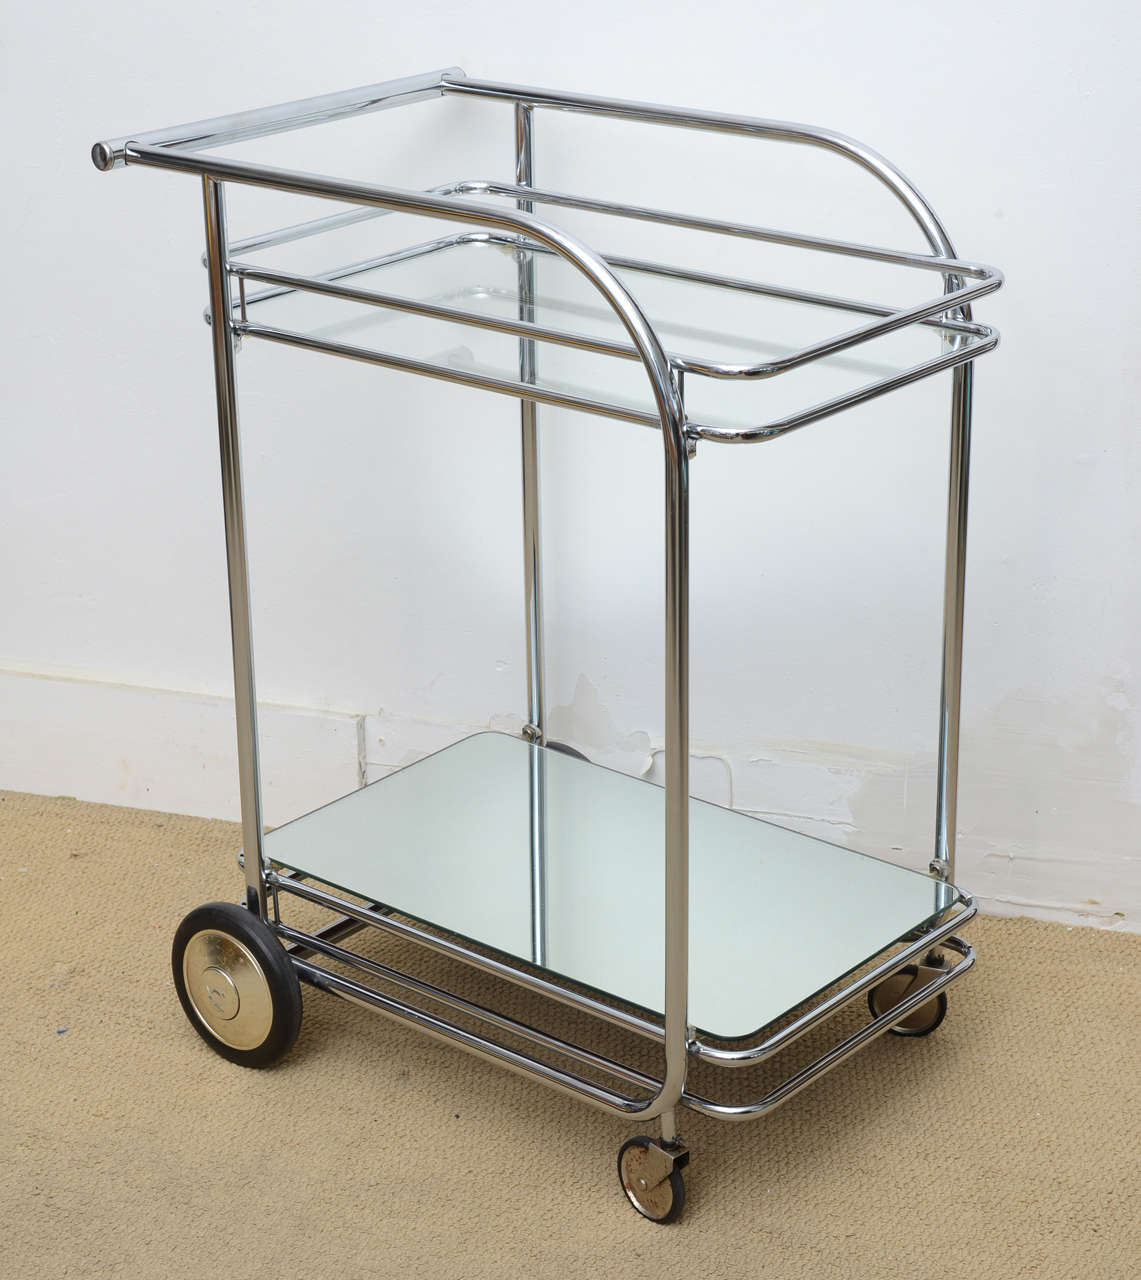 This all original Art Deco style serving or bar cart I believe dates back to the 1960s. However there is a possibility it could date back to early decades. During the sixties there was an Art Deco resurgence that's why I believe this to be from that